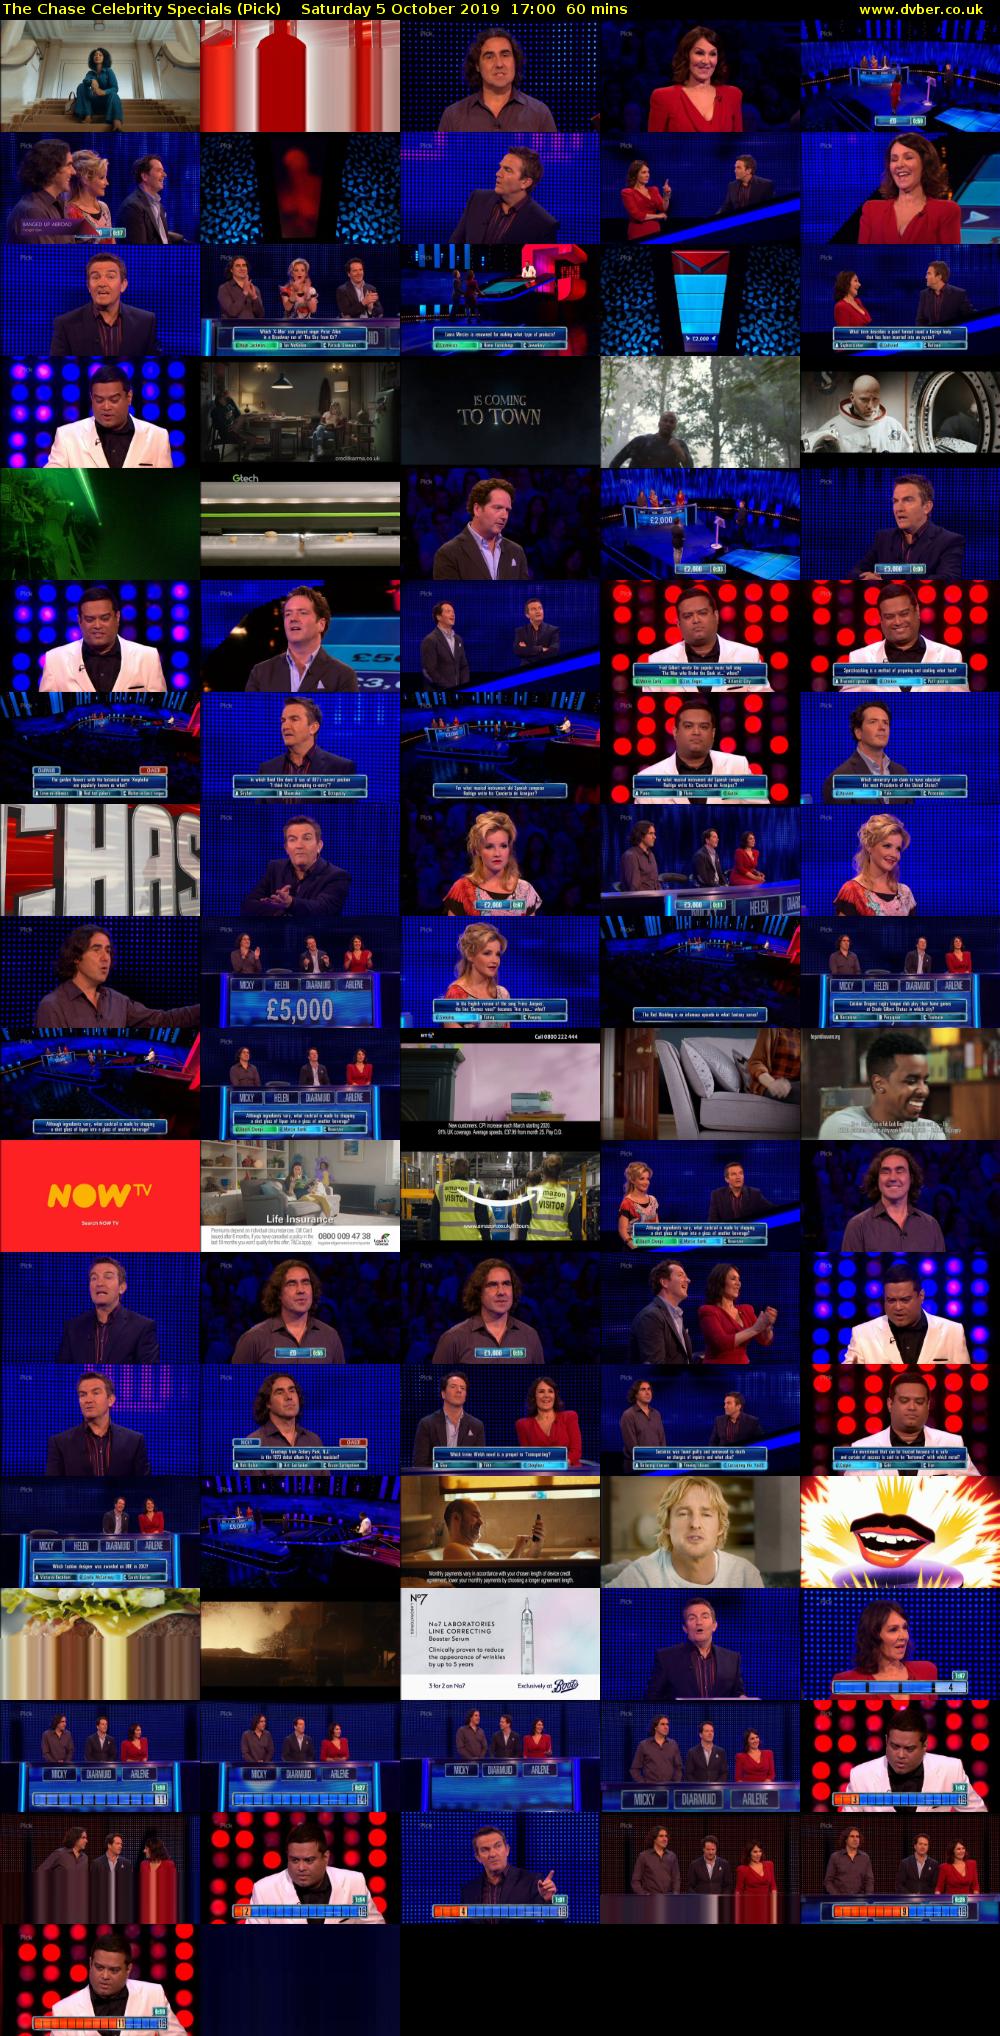 The Chase Celebrity Specials (Pick) Saturday 5 October 2019 17:00 - 18:00